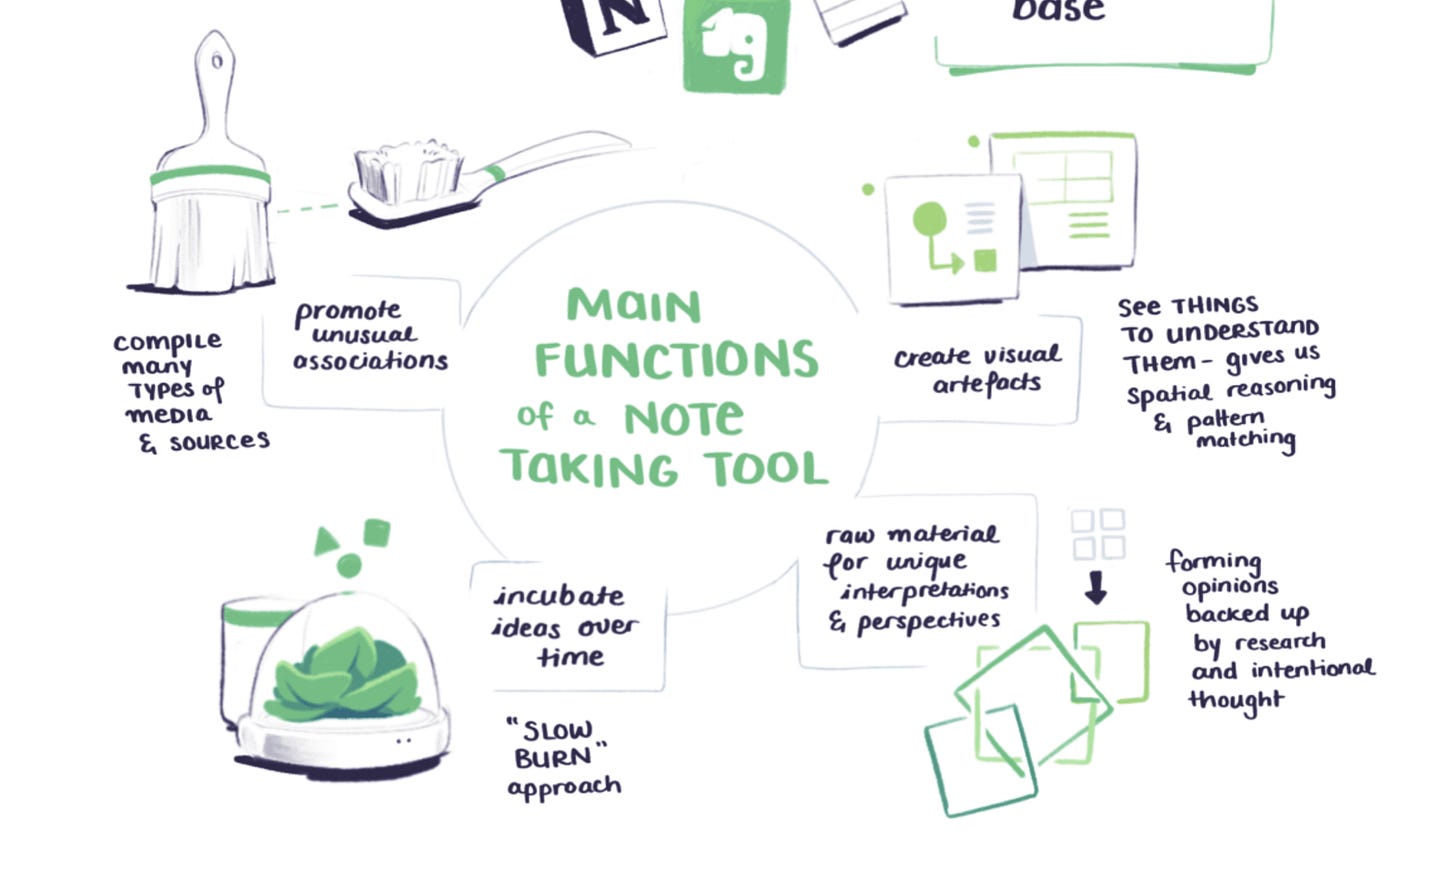 Sketchnote diagram of the main functions of a note taking tool